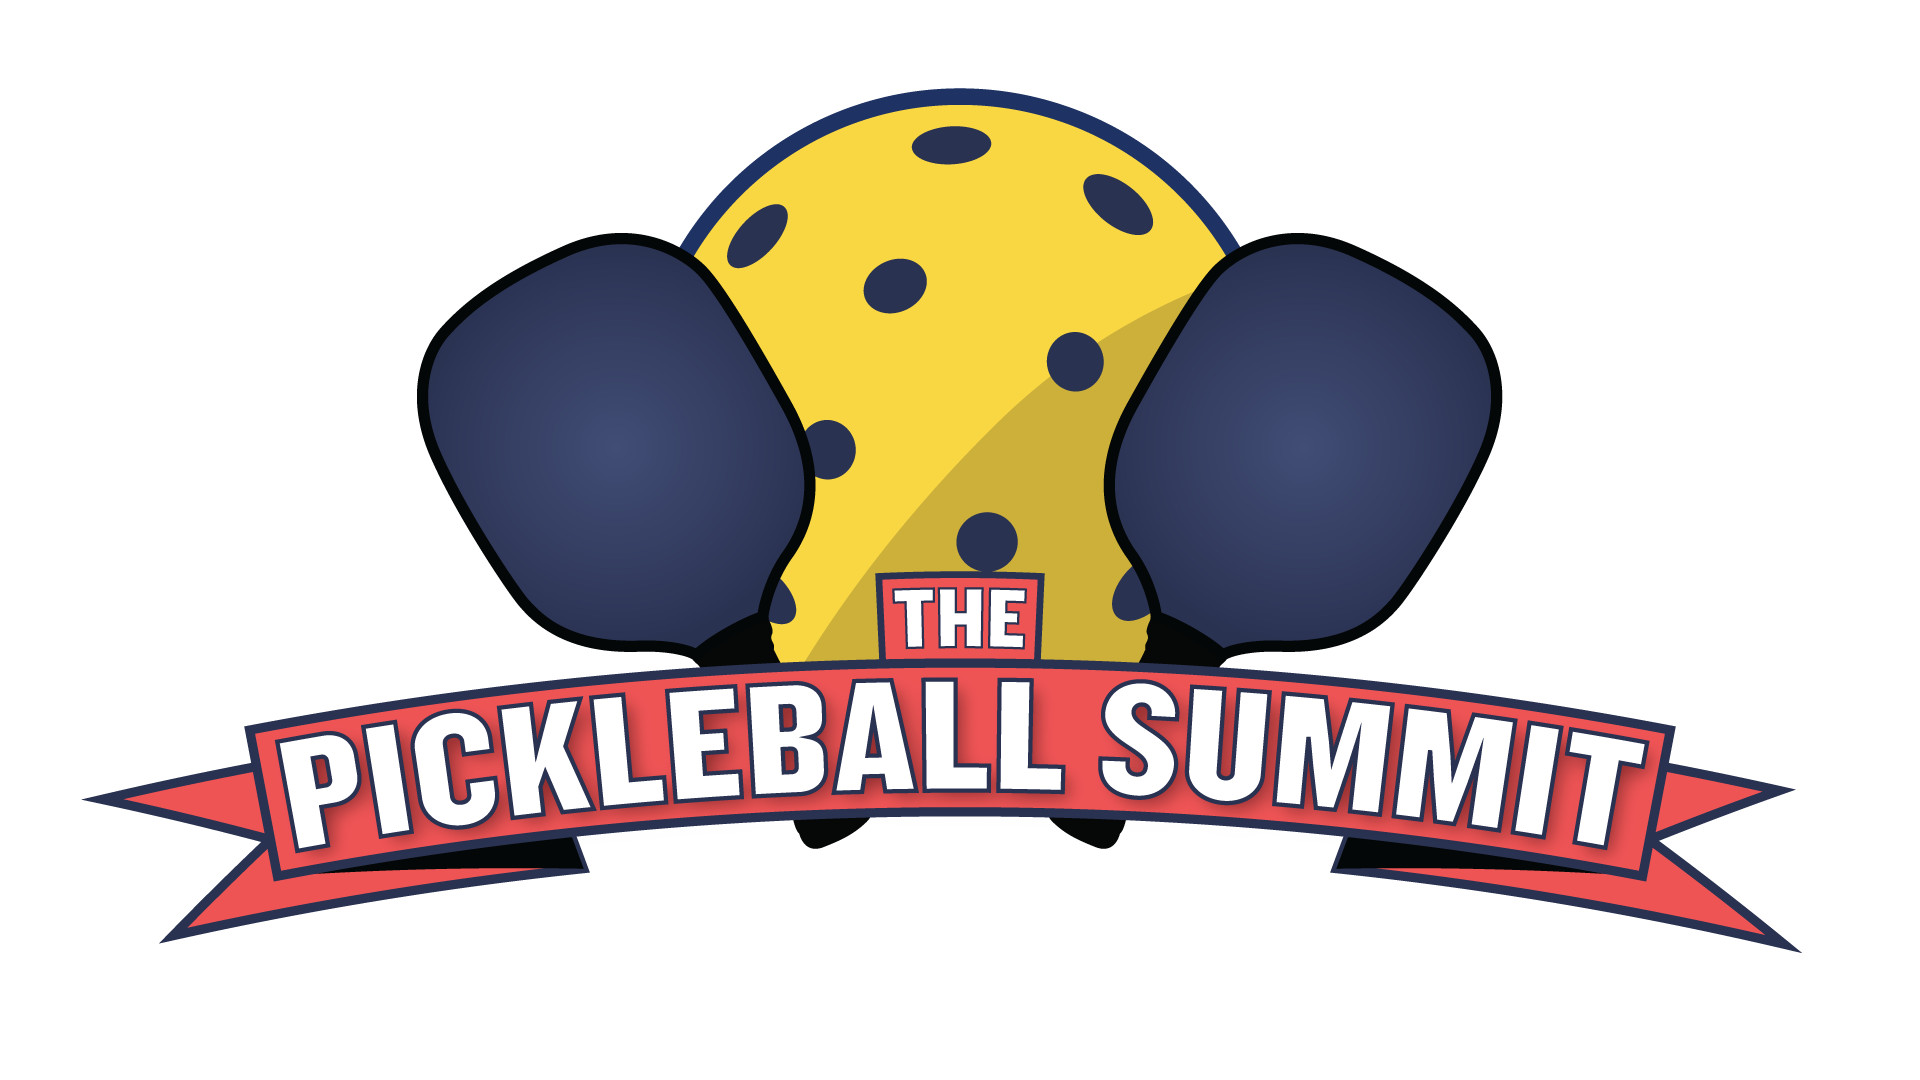 Pickleball Is Great On The Pickleball Summit 3626